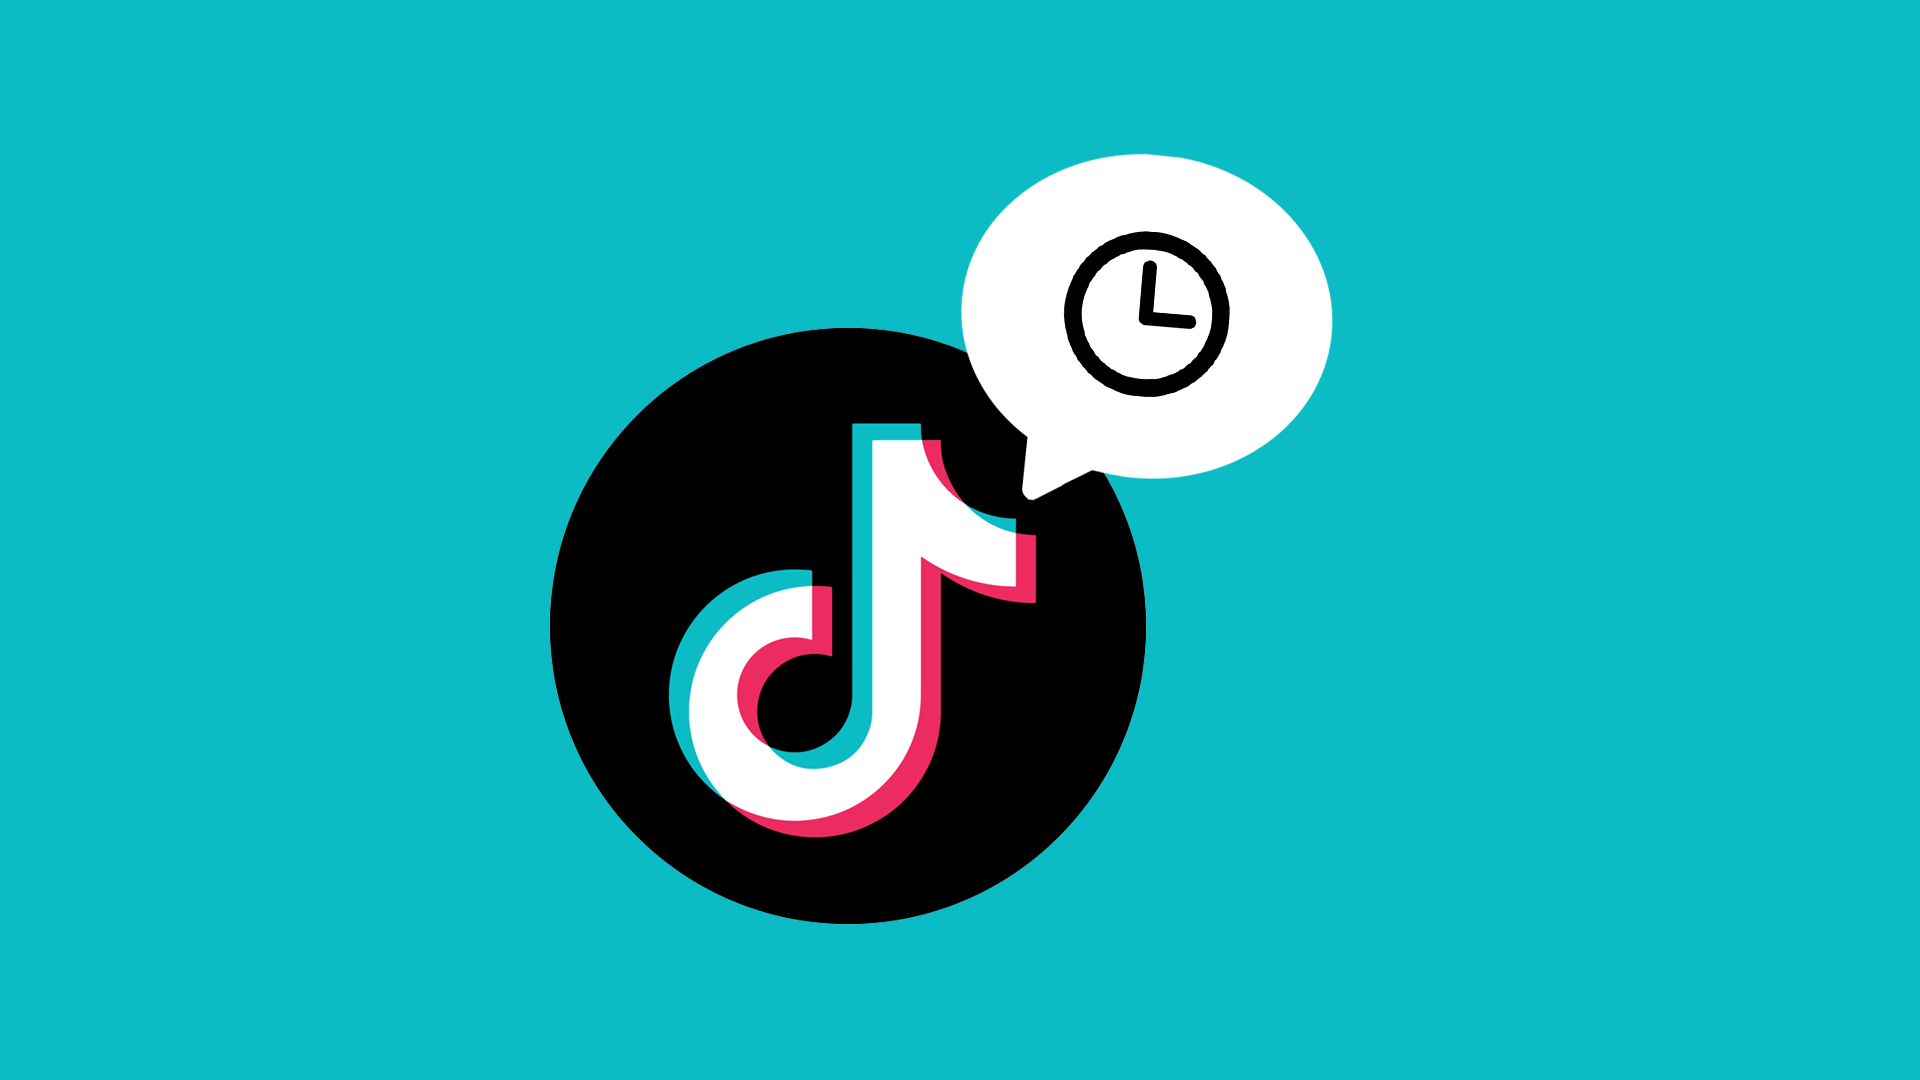 Gen Z are spending more time on TikTok than any other app